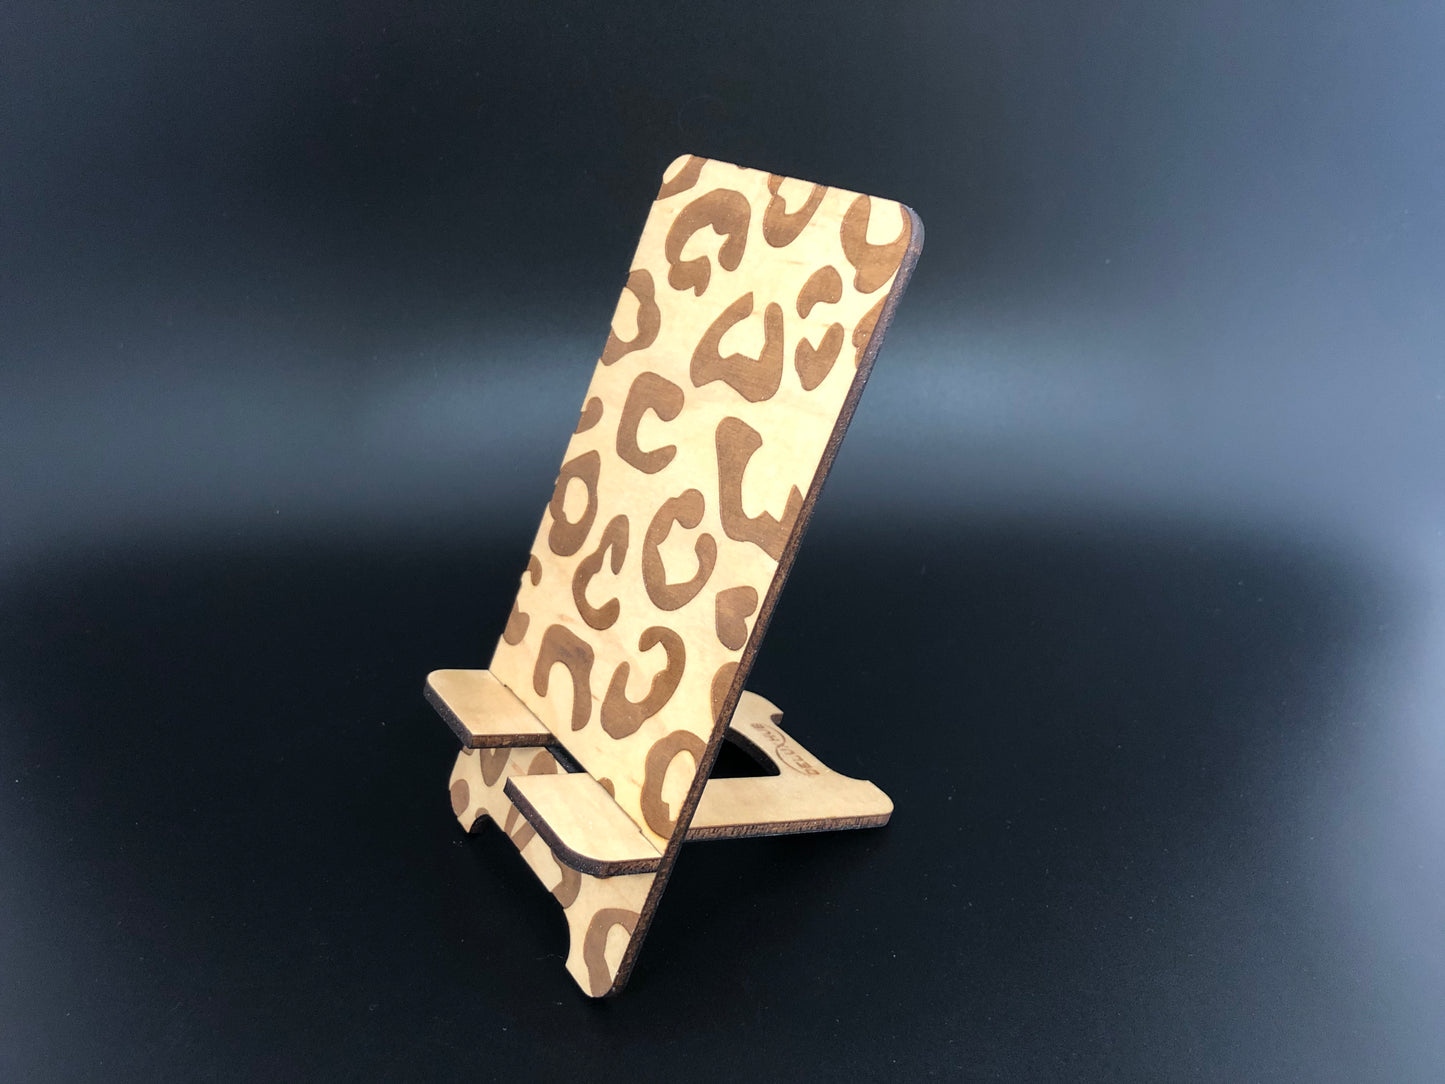 Wooden Phone Stand, Customized, Laser Cut and Engraved, Mother's Day Gift, Birthday Gift, Personalized Docking Station, Animal Print